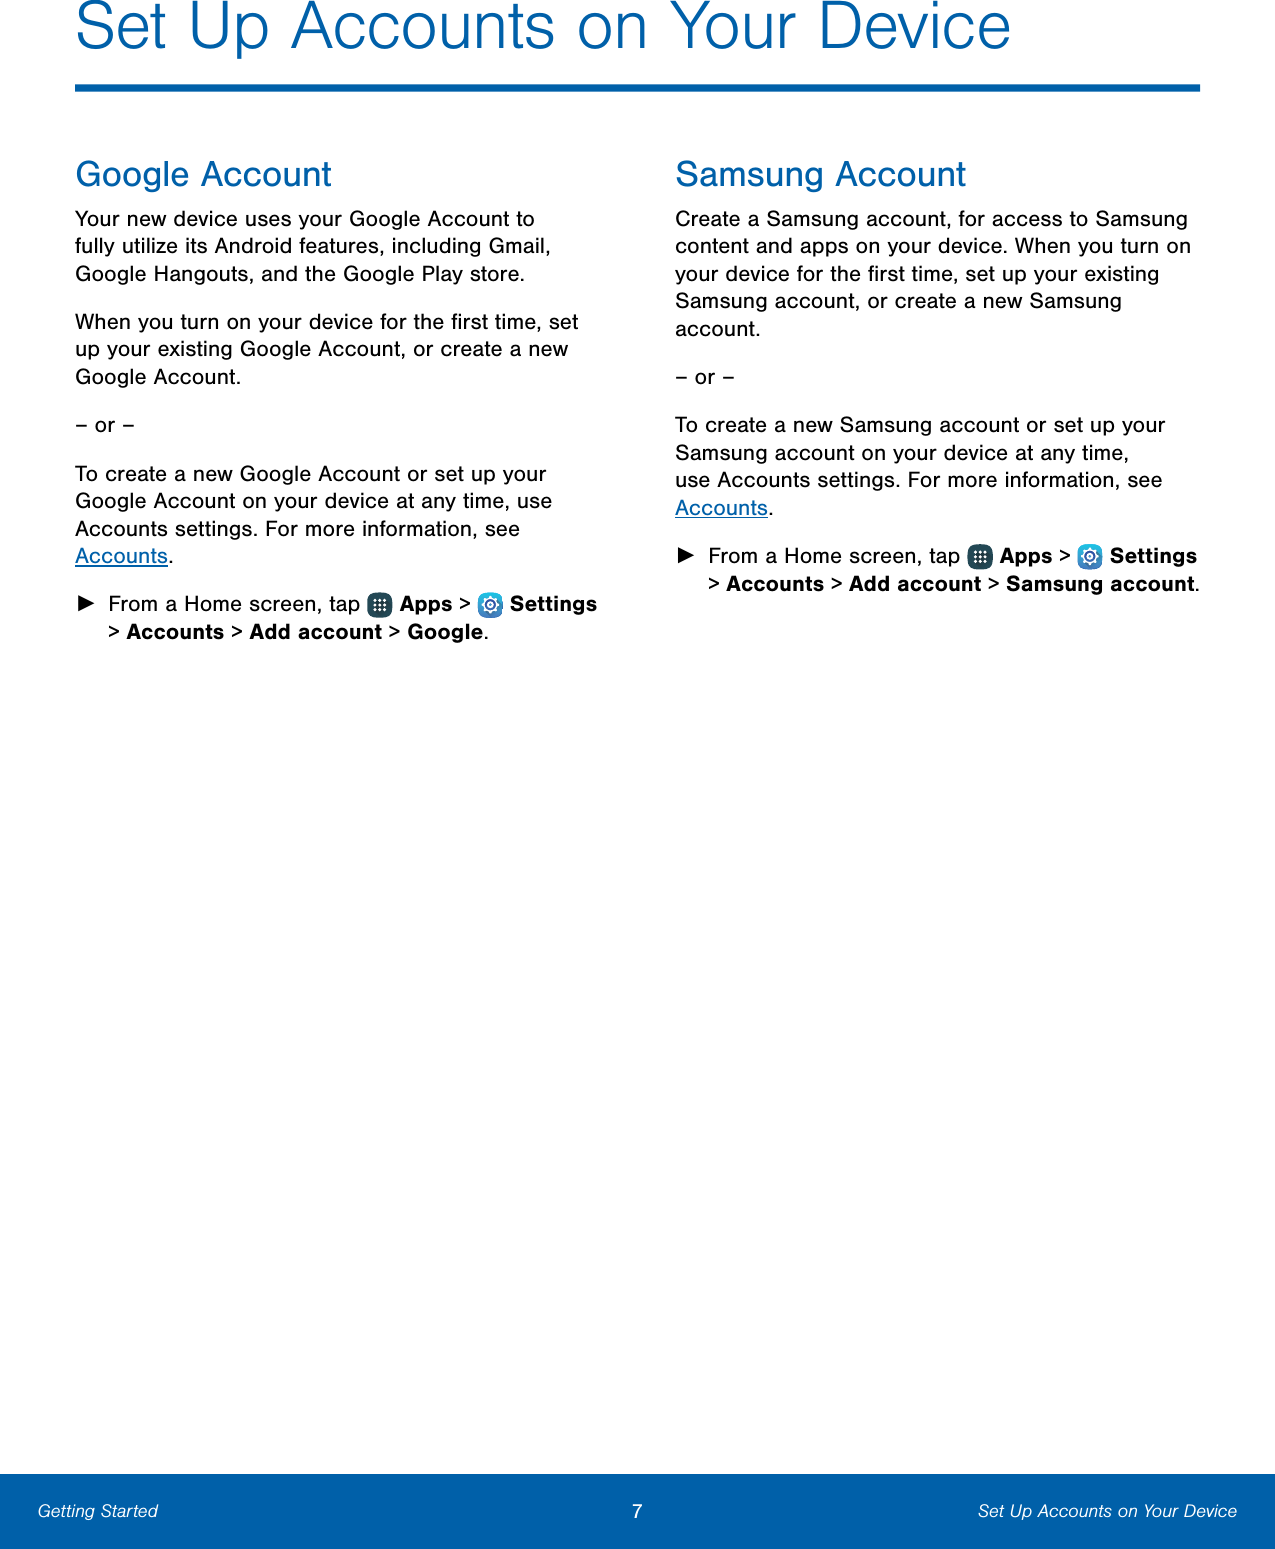   Set Up Accounts on Your Device  Google Account Your new device uses your Google Account to fully utilize its Android features, including Gmail, GoogleHangouts, and the Google Play store. When you turn on your device for the ﬁrst time, set up your existing Google Account, or create a new GoogleAccount. – or – To create a new Google Account or set up your Google Account on your device at any time, use Accounts settings. Formore information, see Accounts. ► From a Home screen, tap   Apps &gt;  Settings &gt; Accounts &gt; Add account &gt; Google. Samsung Account Create a Samsung account, for access to Samsung content and apps on your device. When you turn on your device for the ﬁrst time, set up your existing Samsung account, or create a new Samsung account. – or – To create a new Samsung account or set up your Samsung account on your device at any time, use Accounts settings. Formore information, see Accounts. ► From a Home screen, tap   Apps &gt;  Settings &gt; Accounts &gt; Add account &gt; Samsungaccount. Getting Started  7  Set Up Accounts on Your Device 